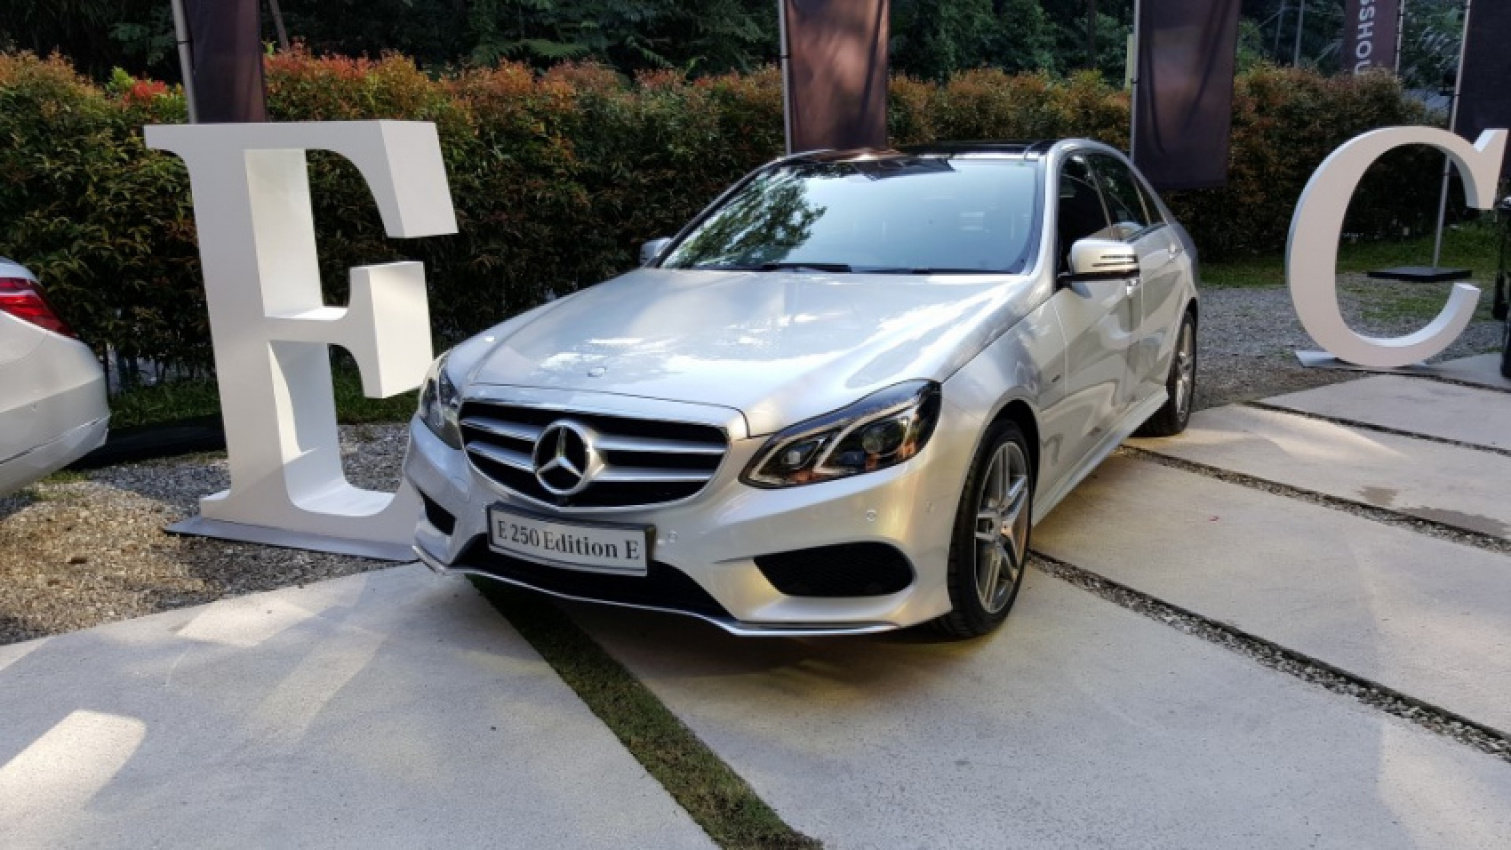 autos, cars, featured, mercedes-benz, a-class, c-class, e-class, mercedes, s class, mercedes-benz malaysia posts best ever sales result in history, +56%